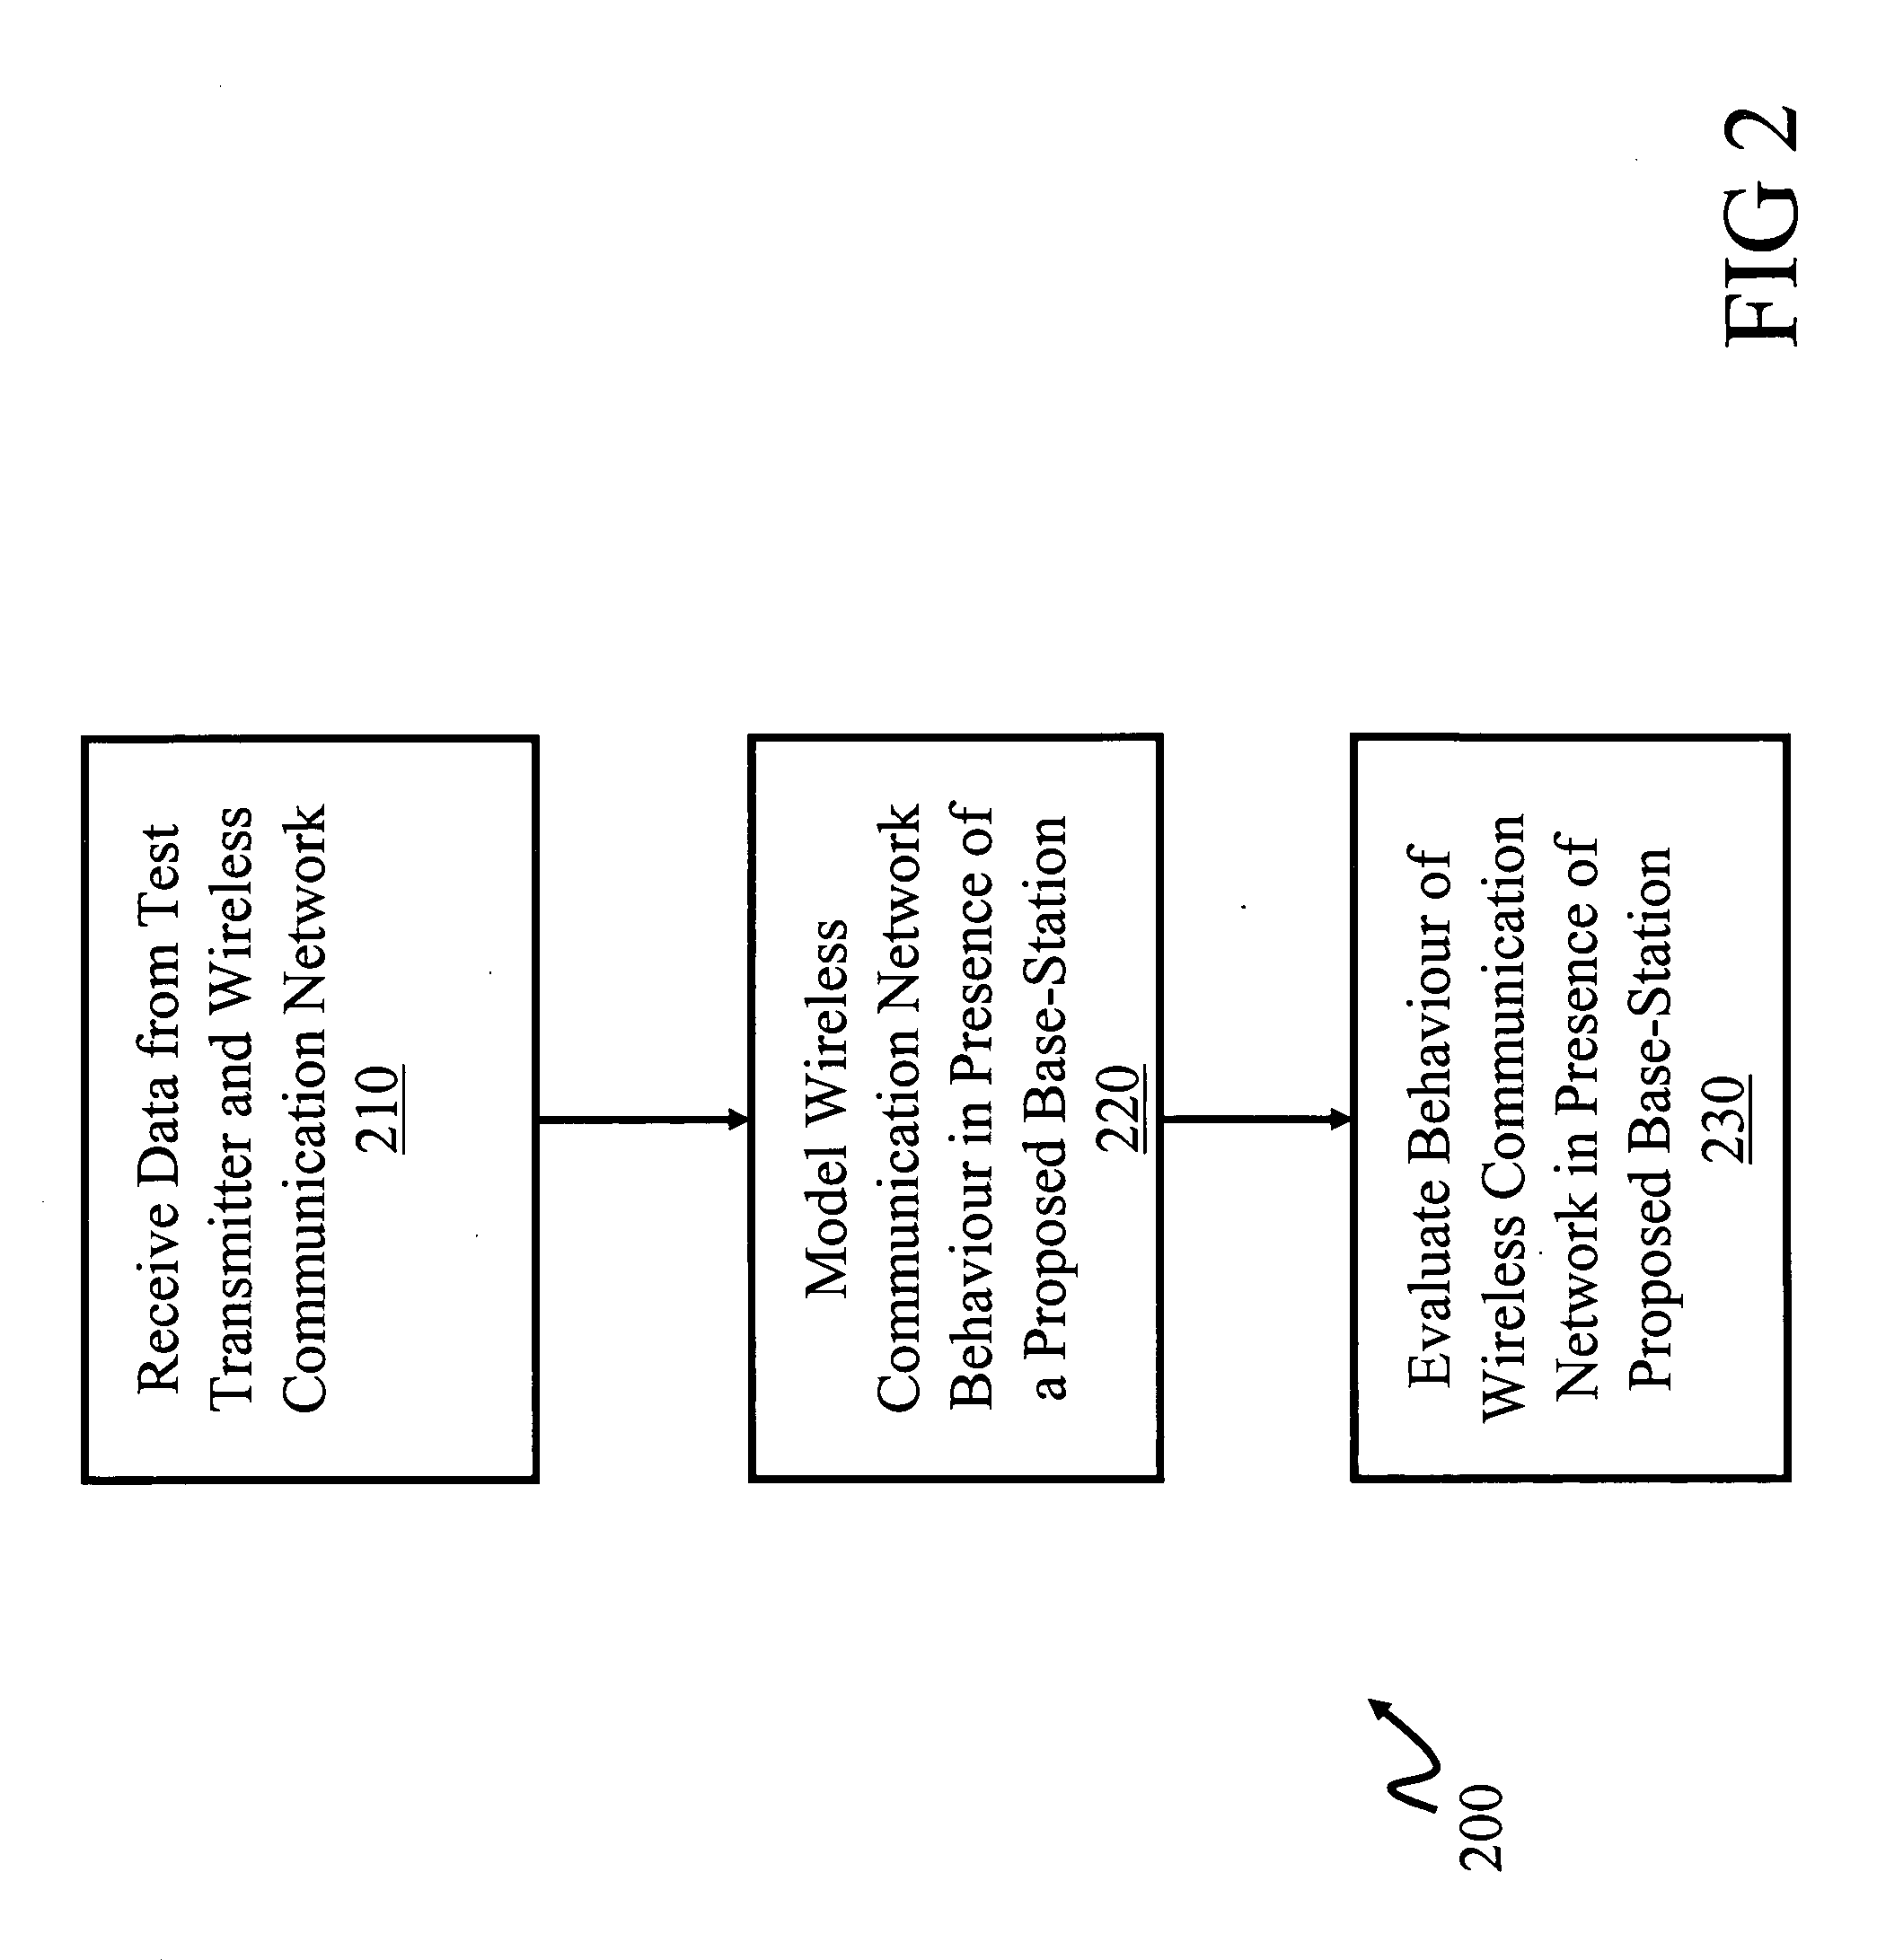 System and method for coverage analysis in a wireless network